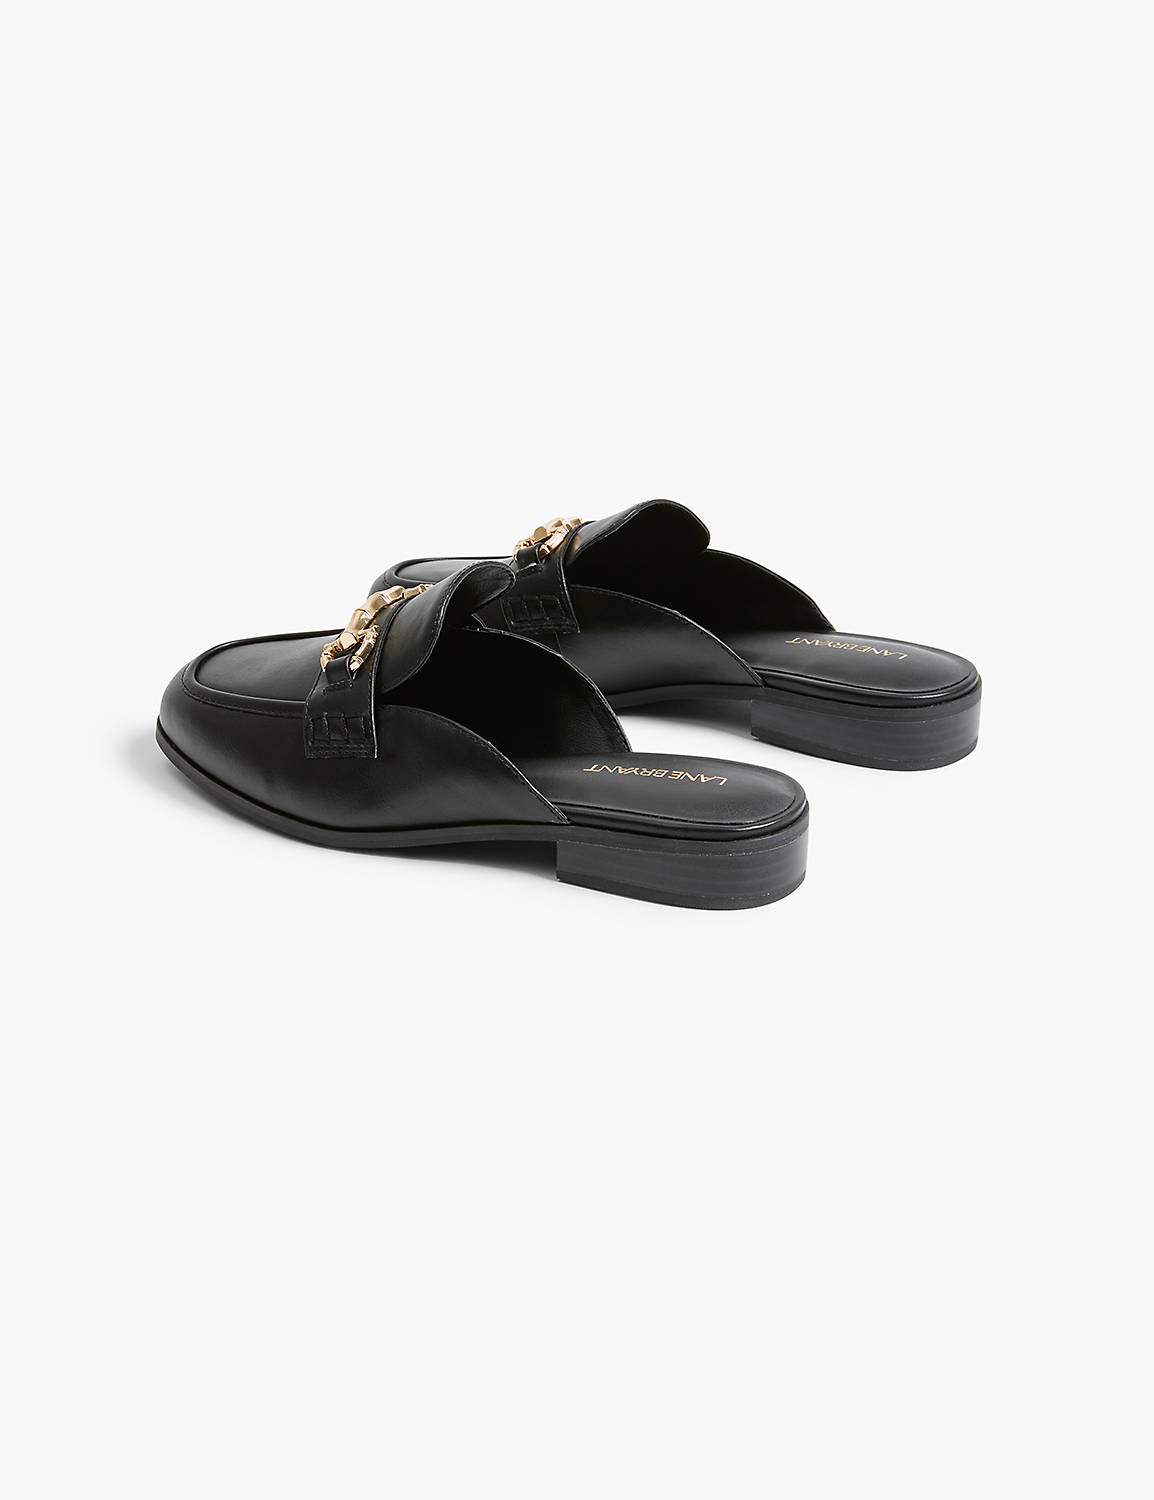 1140561 LOAFER MULE Product Image 2